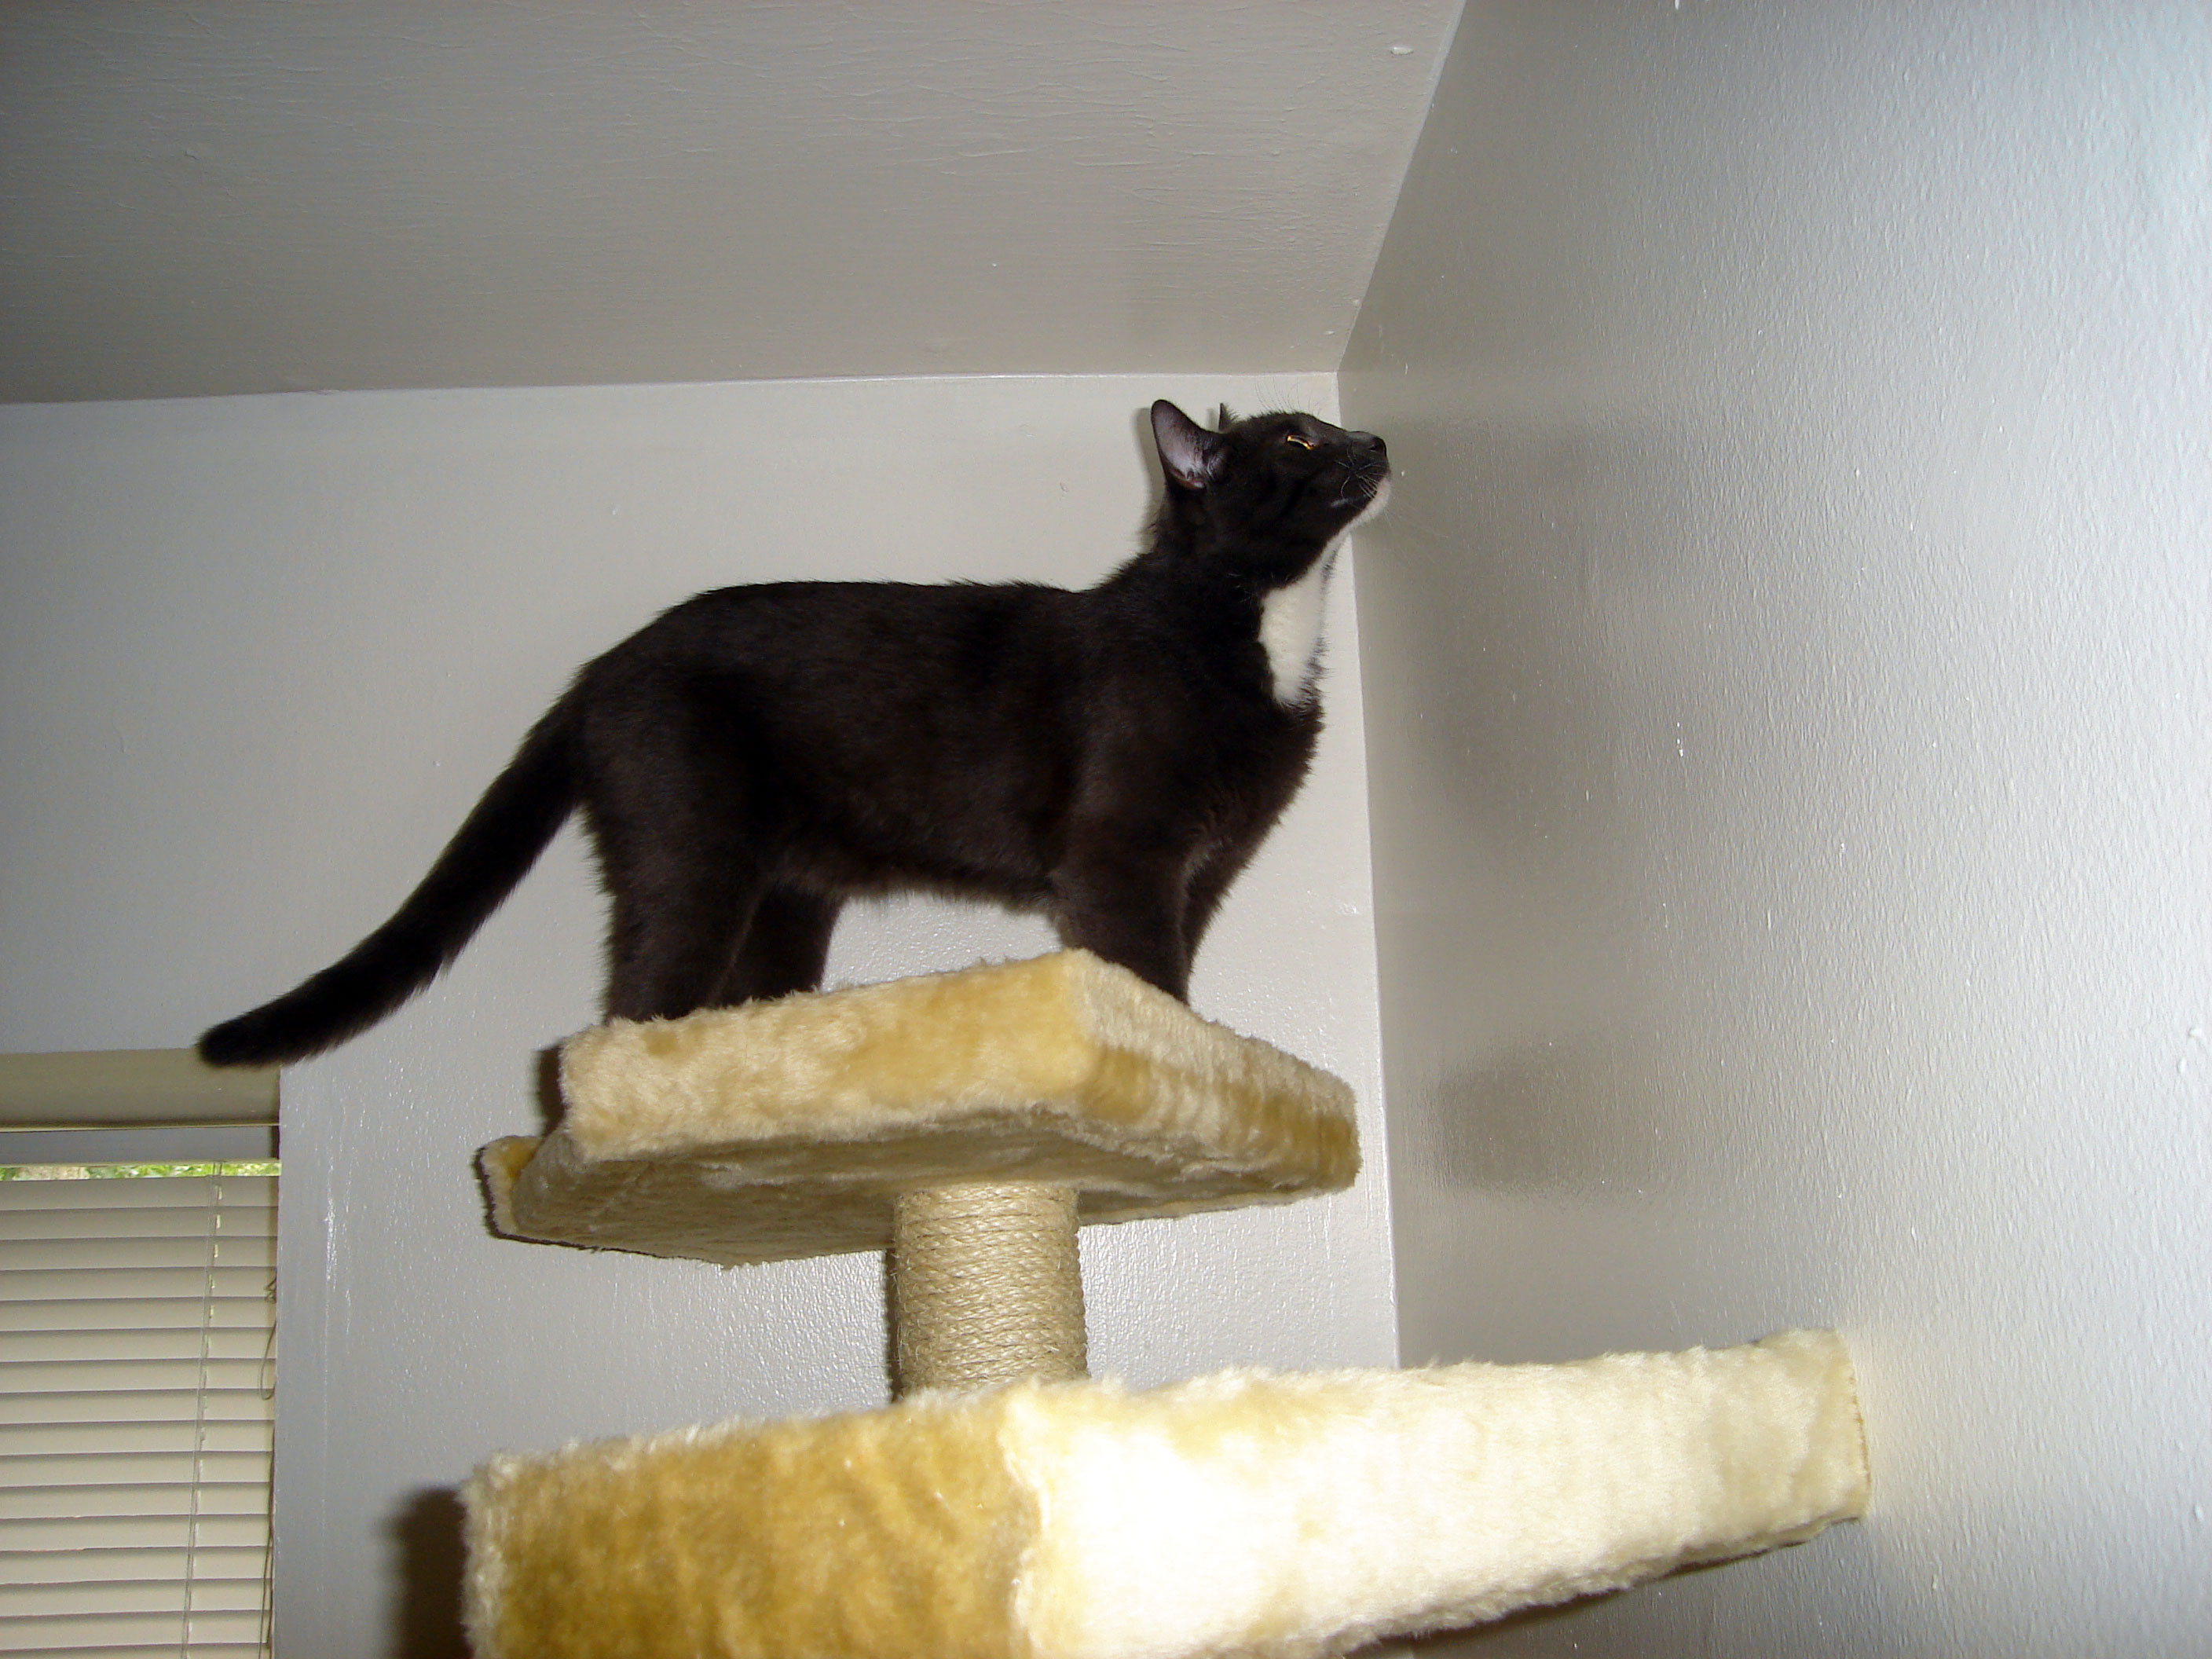 A has climbed up on a cat tree and is close to the ceiling